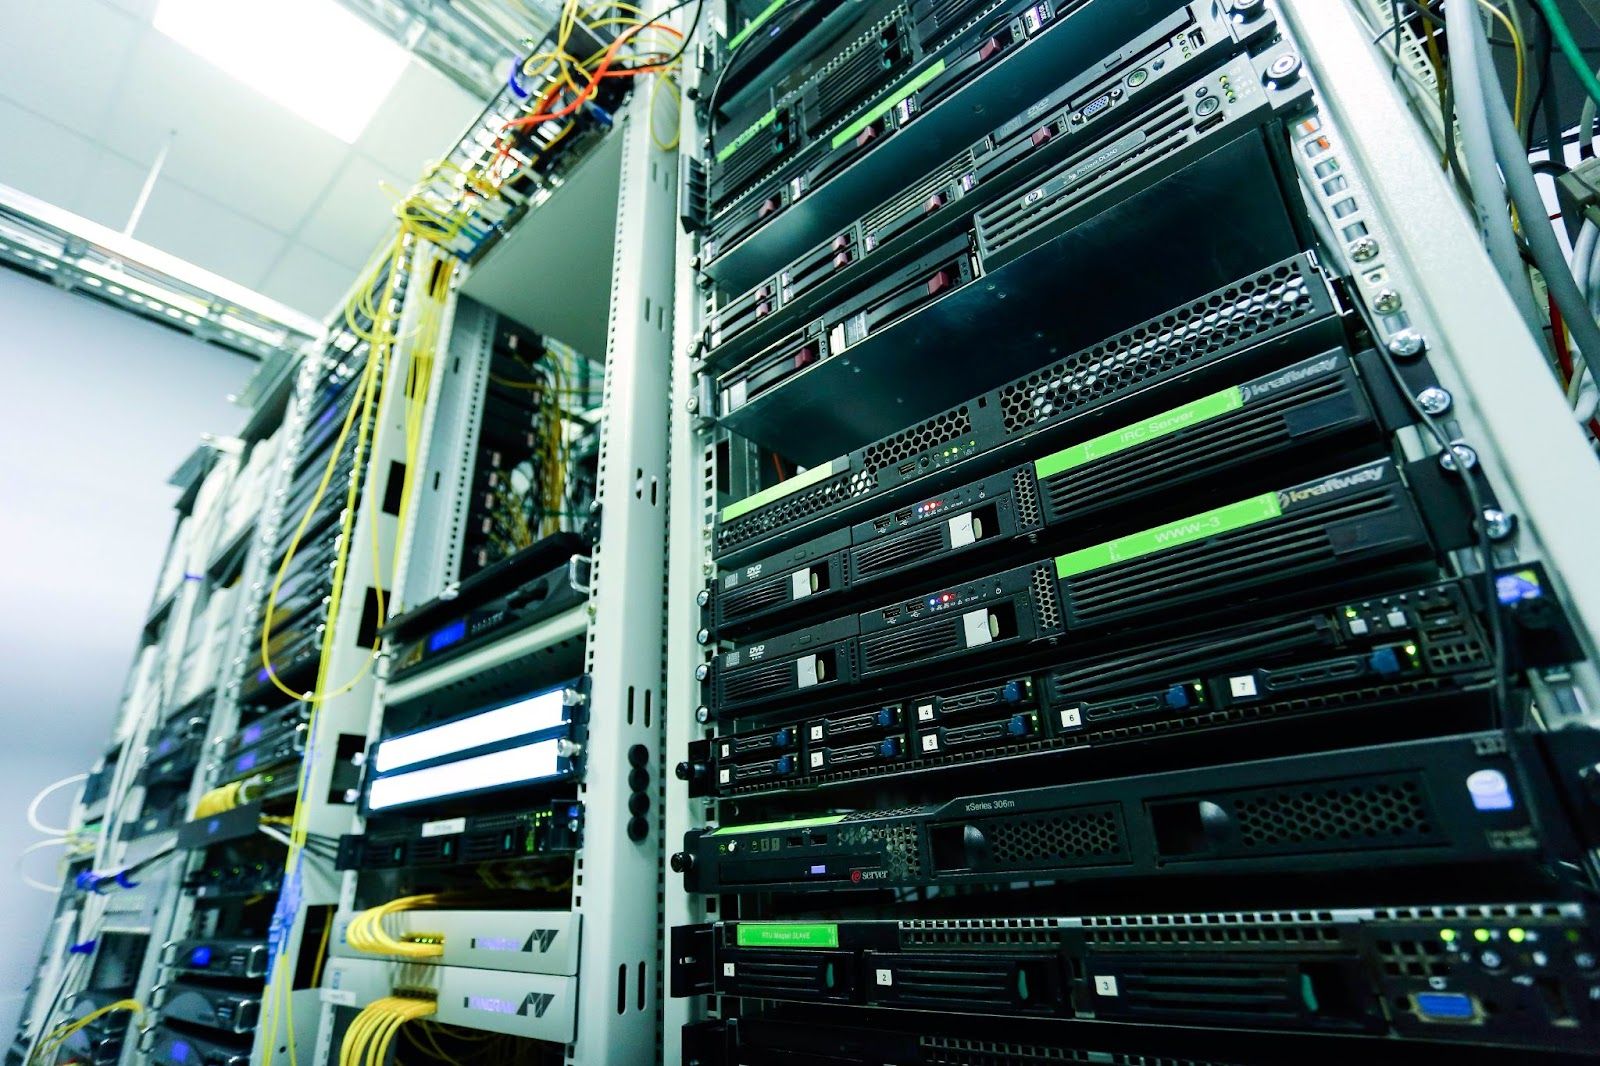 Physical servers at a data center.